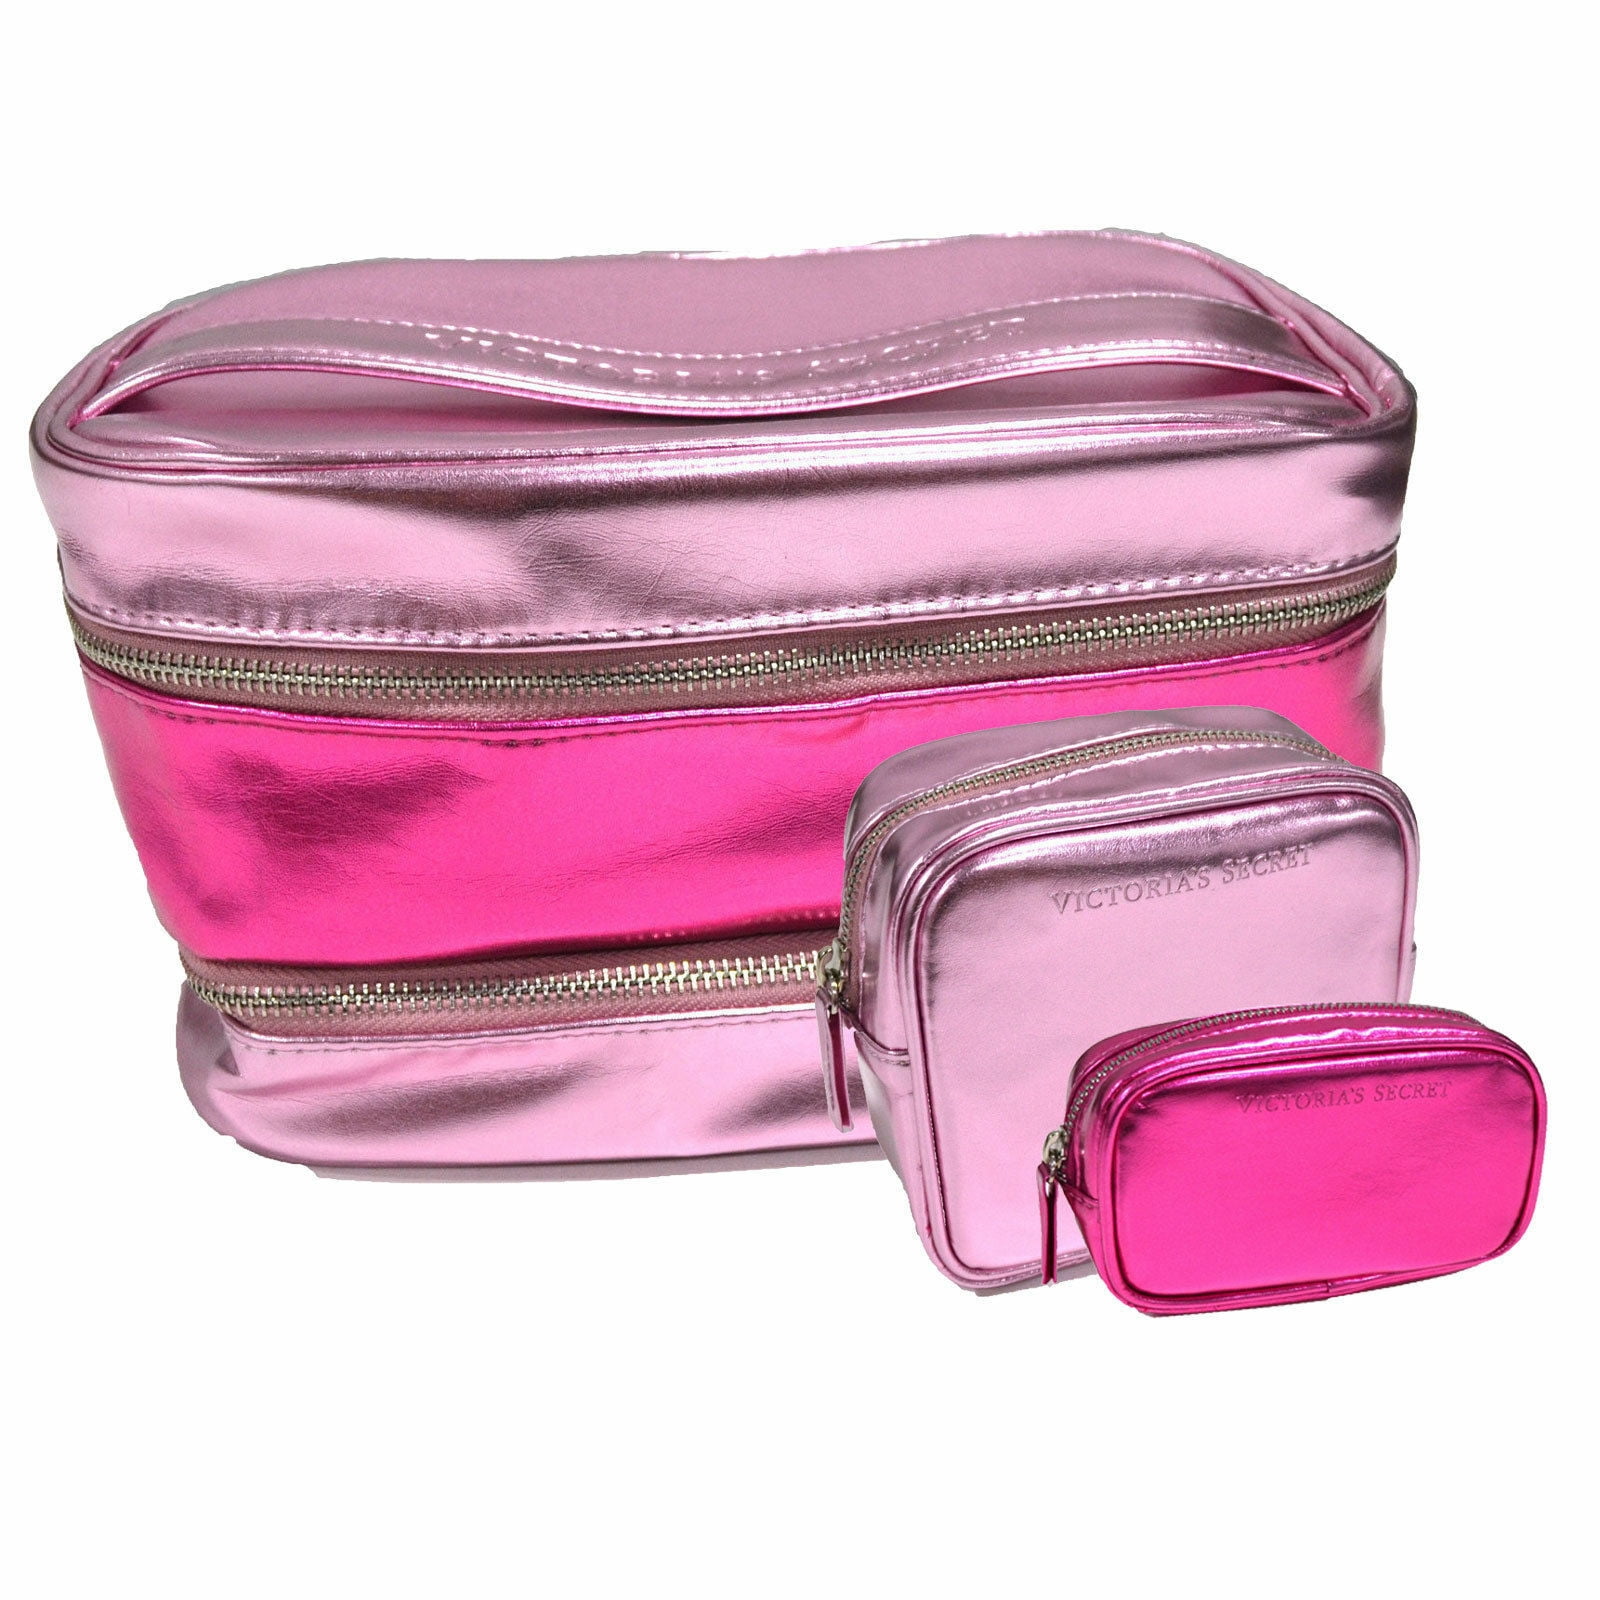  Juicy Couture Women's Toiletries Kit Set - Mixed Trio Travel  Makeup and Cosmetics Large Bag, Clutch, Coin Purse, Size One Size, Pink  Sparkle : Beauty & Personal Care